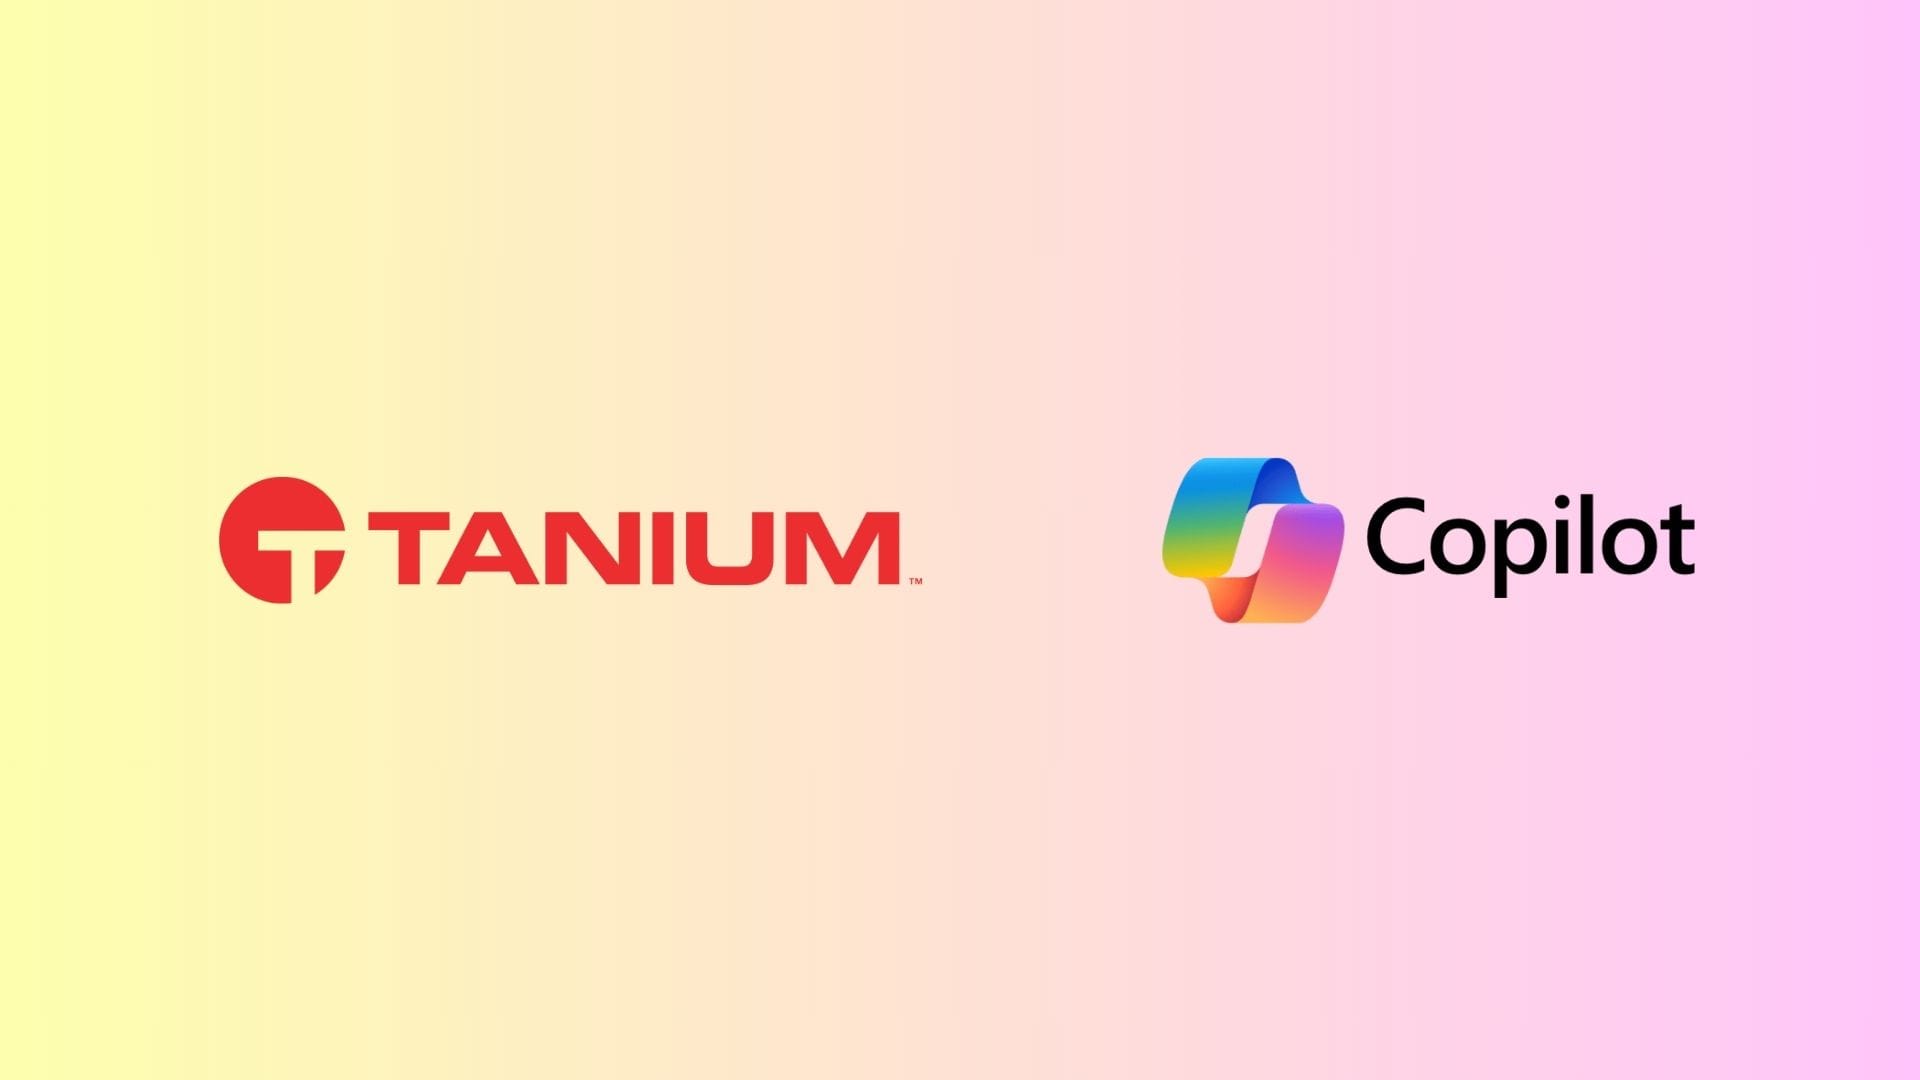 Tanium XEM Joins Forces With Microsoft For AI-Led Cybersecurity